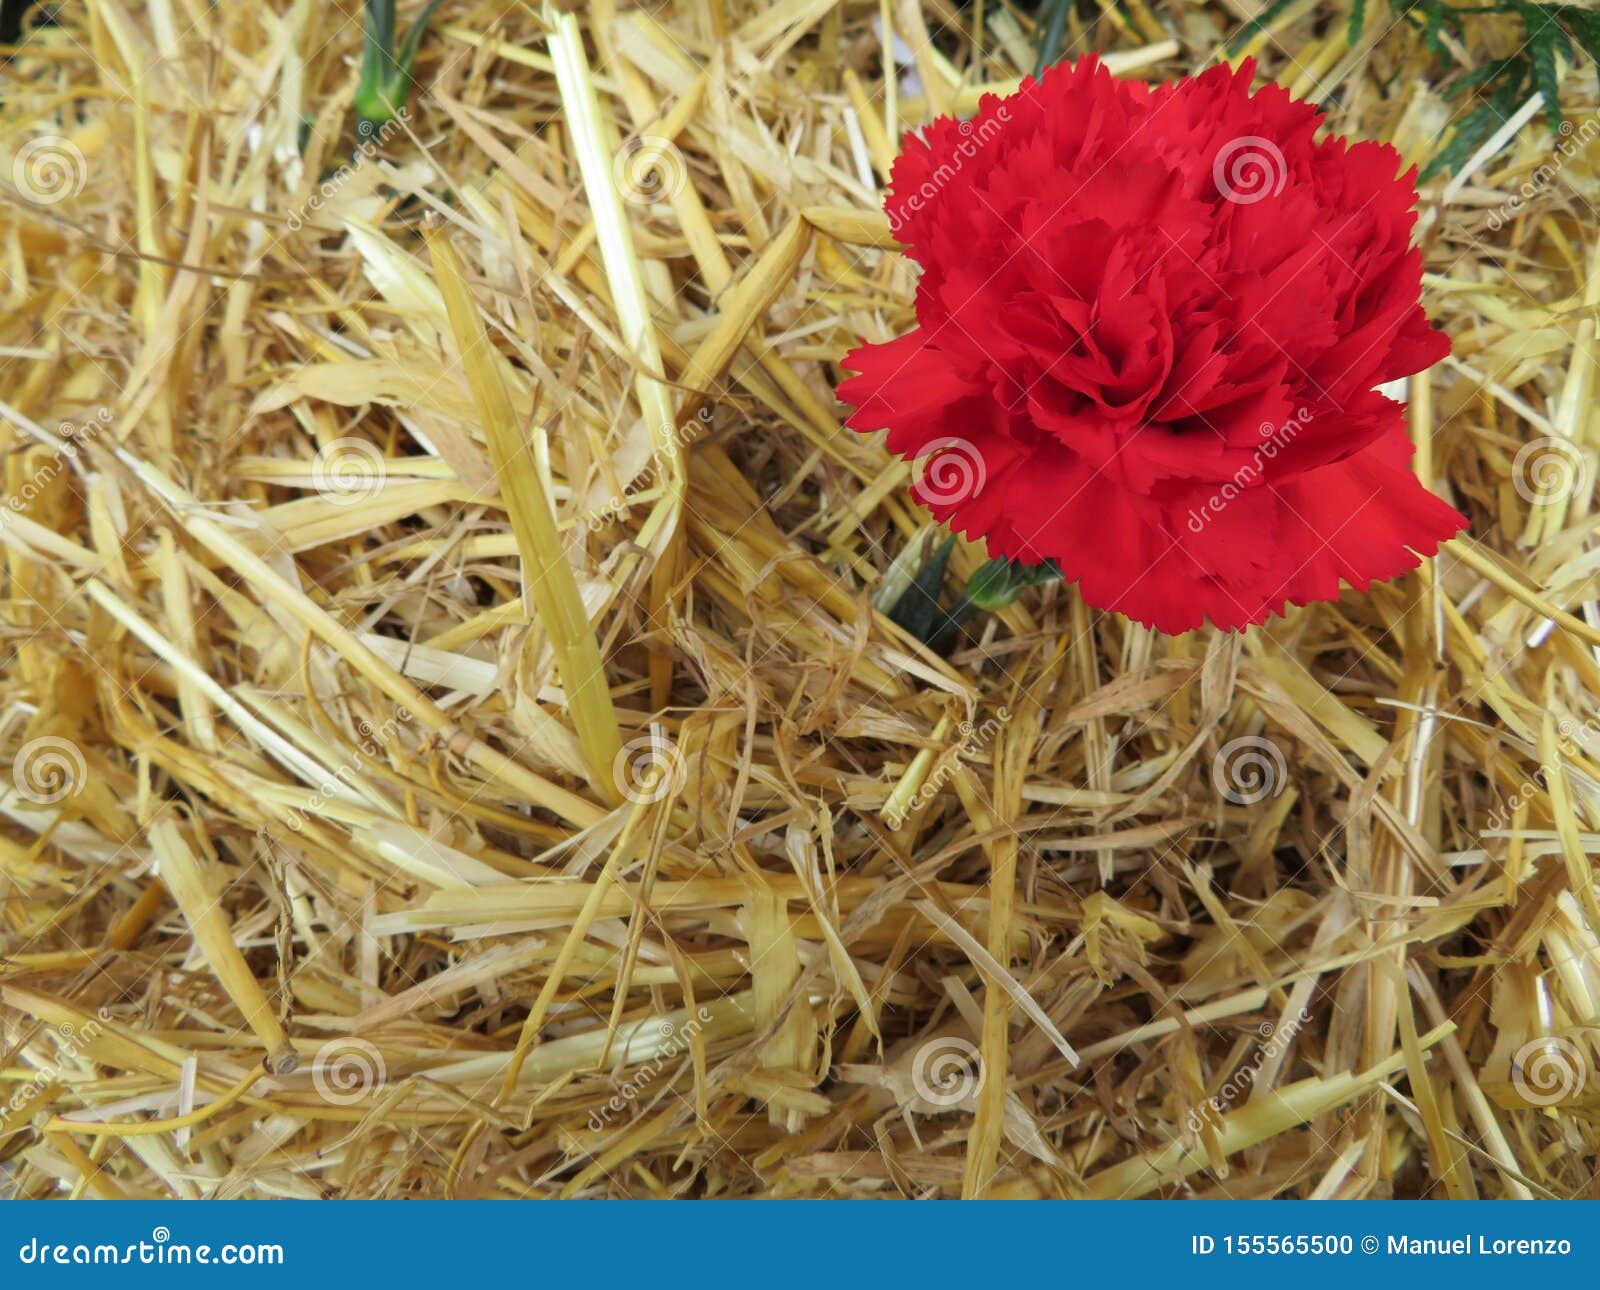 beautiful red flowers of nice color and great aroma tucked in straw